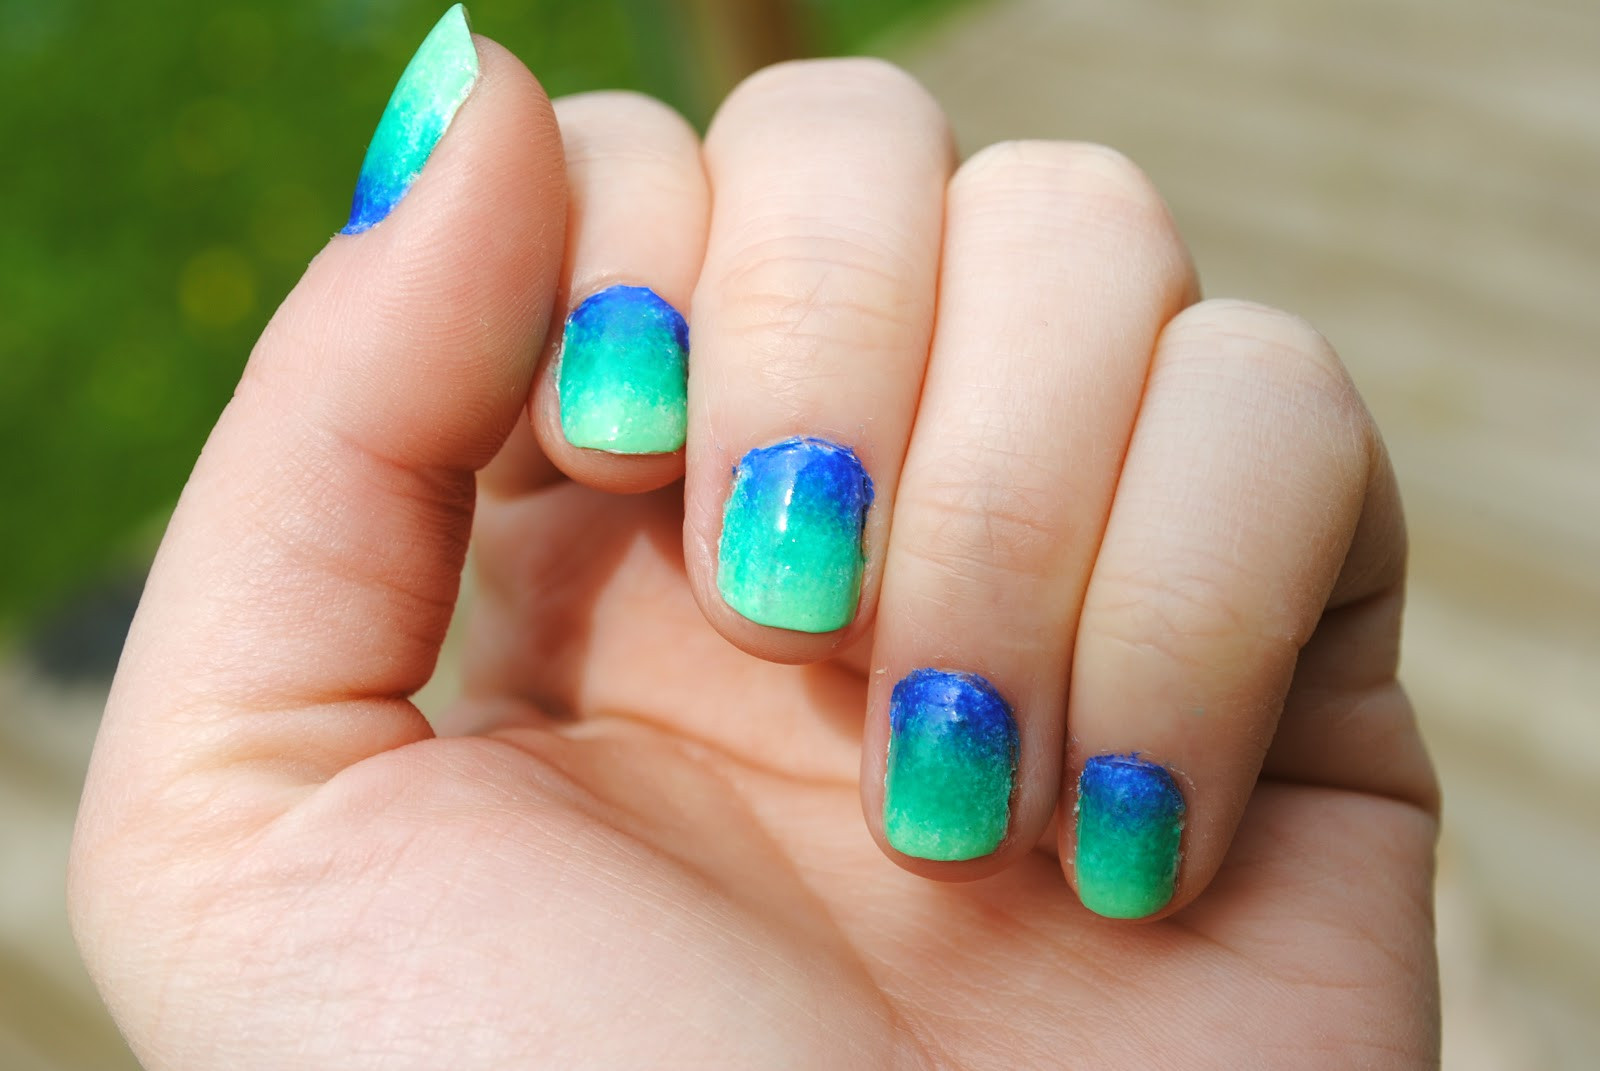 6. Ombre Coffin Nails - wide 9